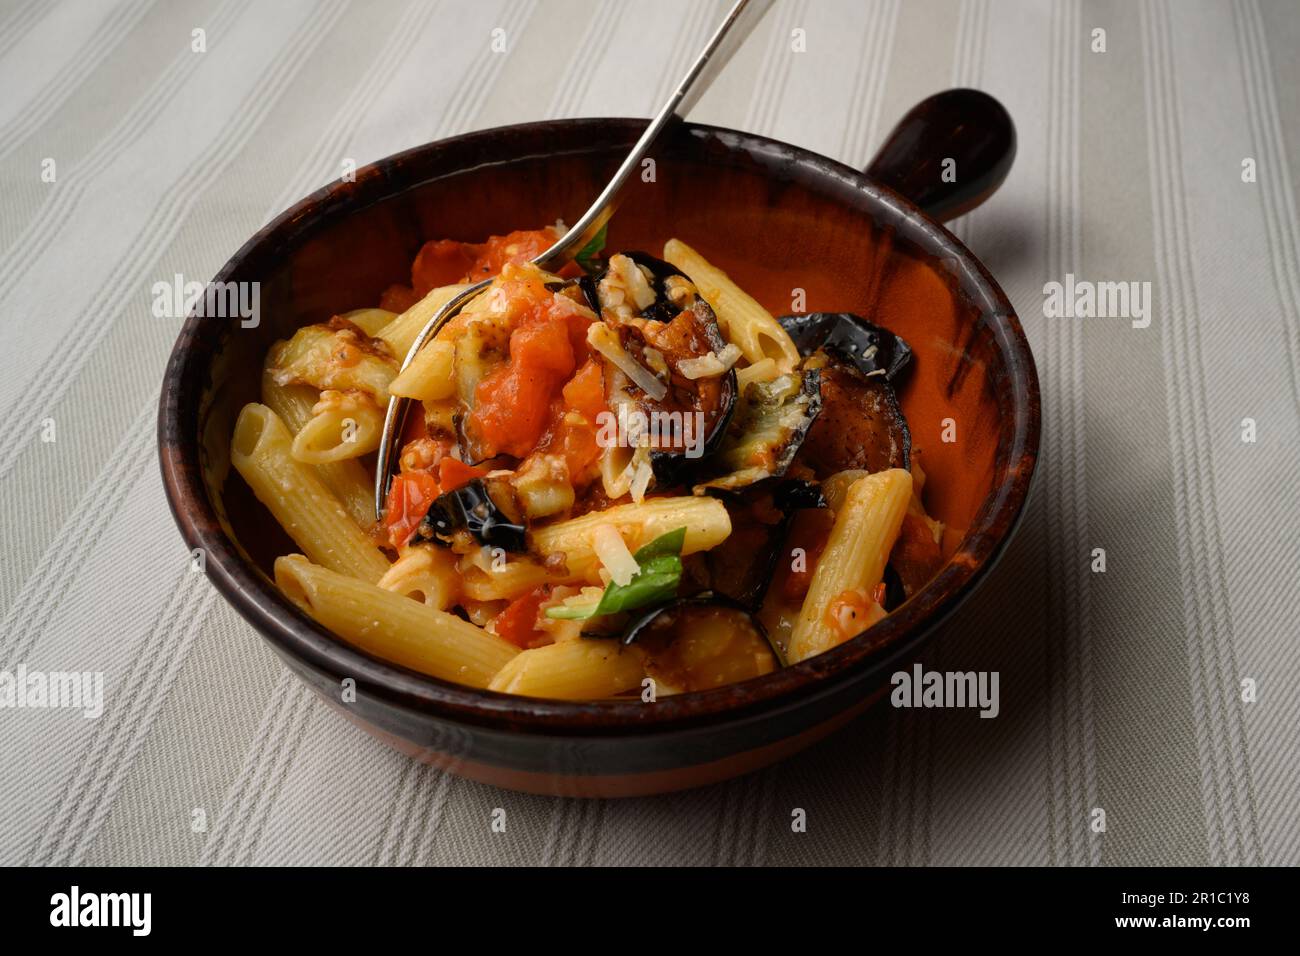 Pasta alla Norma or Penne Rigate with Eggplant and Tomato Sauce and Ricotta in a Rustic Terracotta Bowl Stock Photo